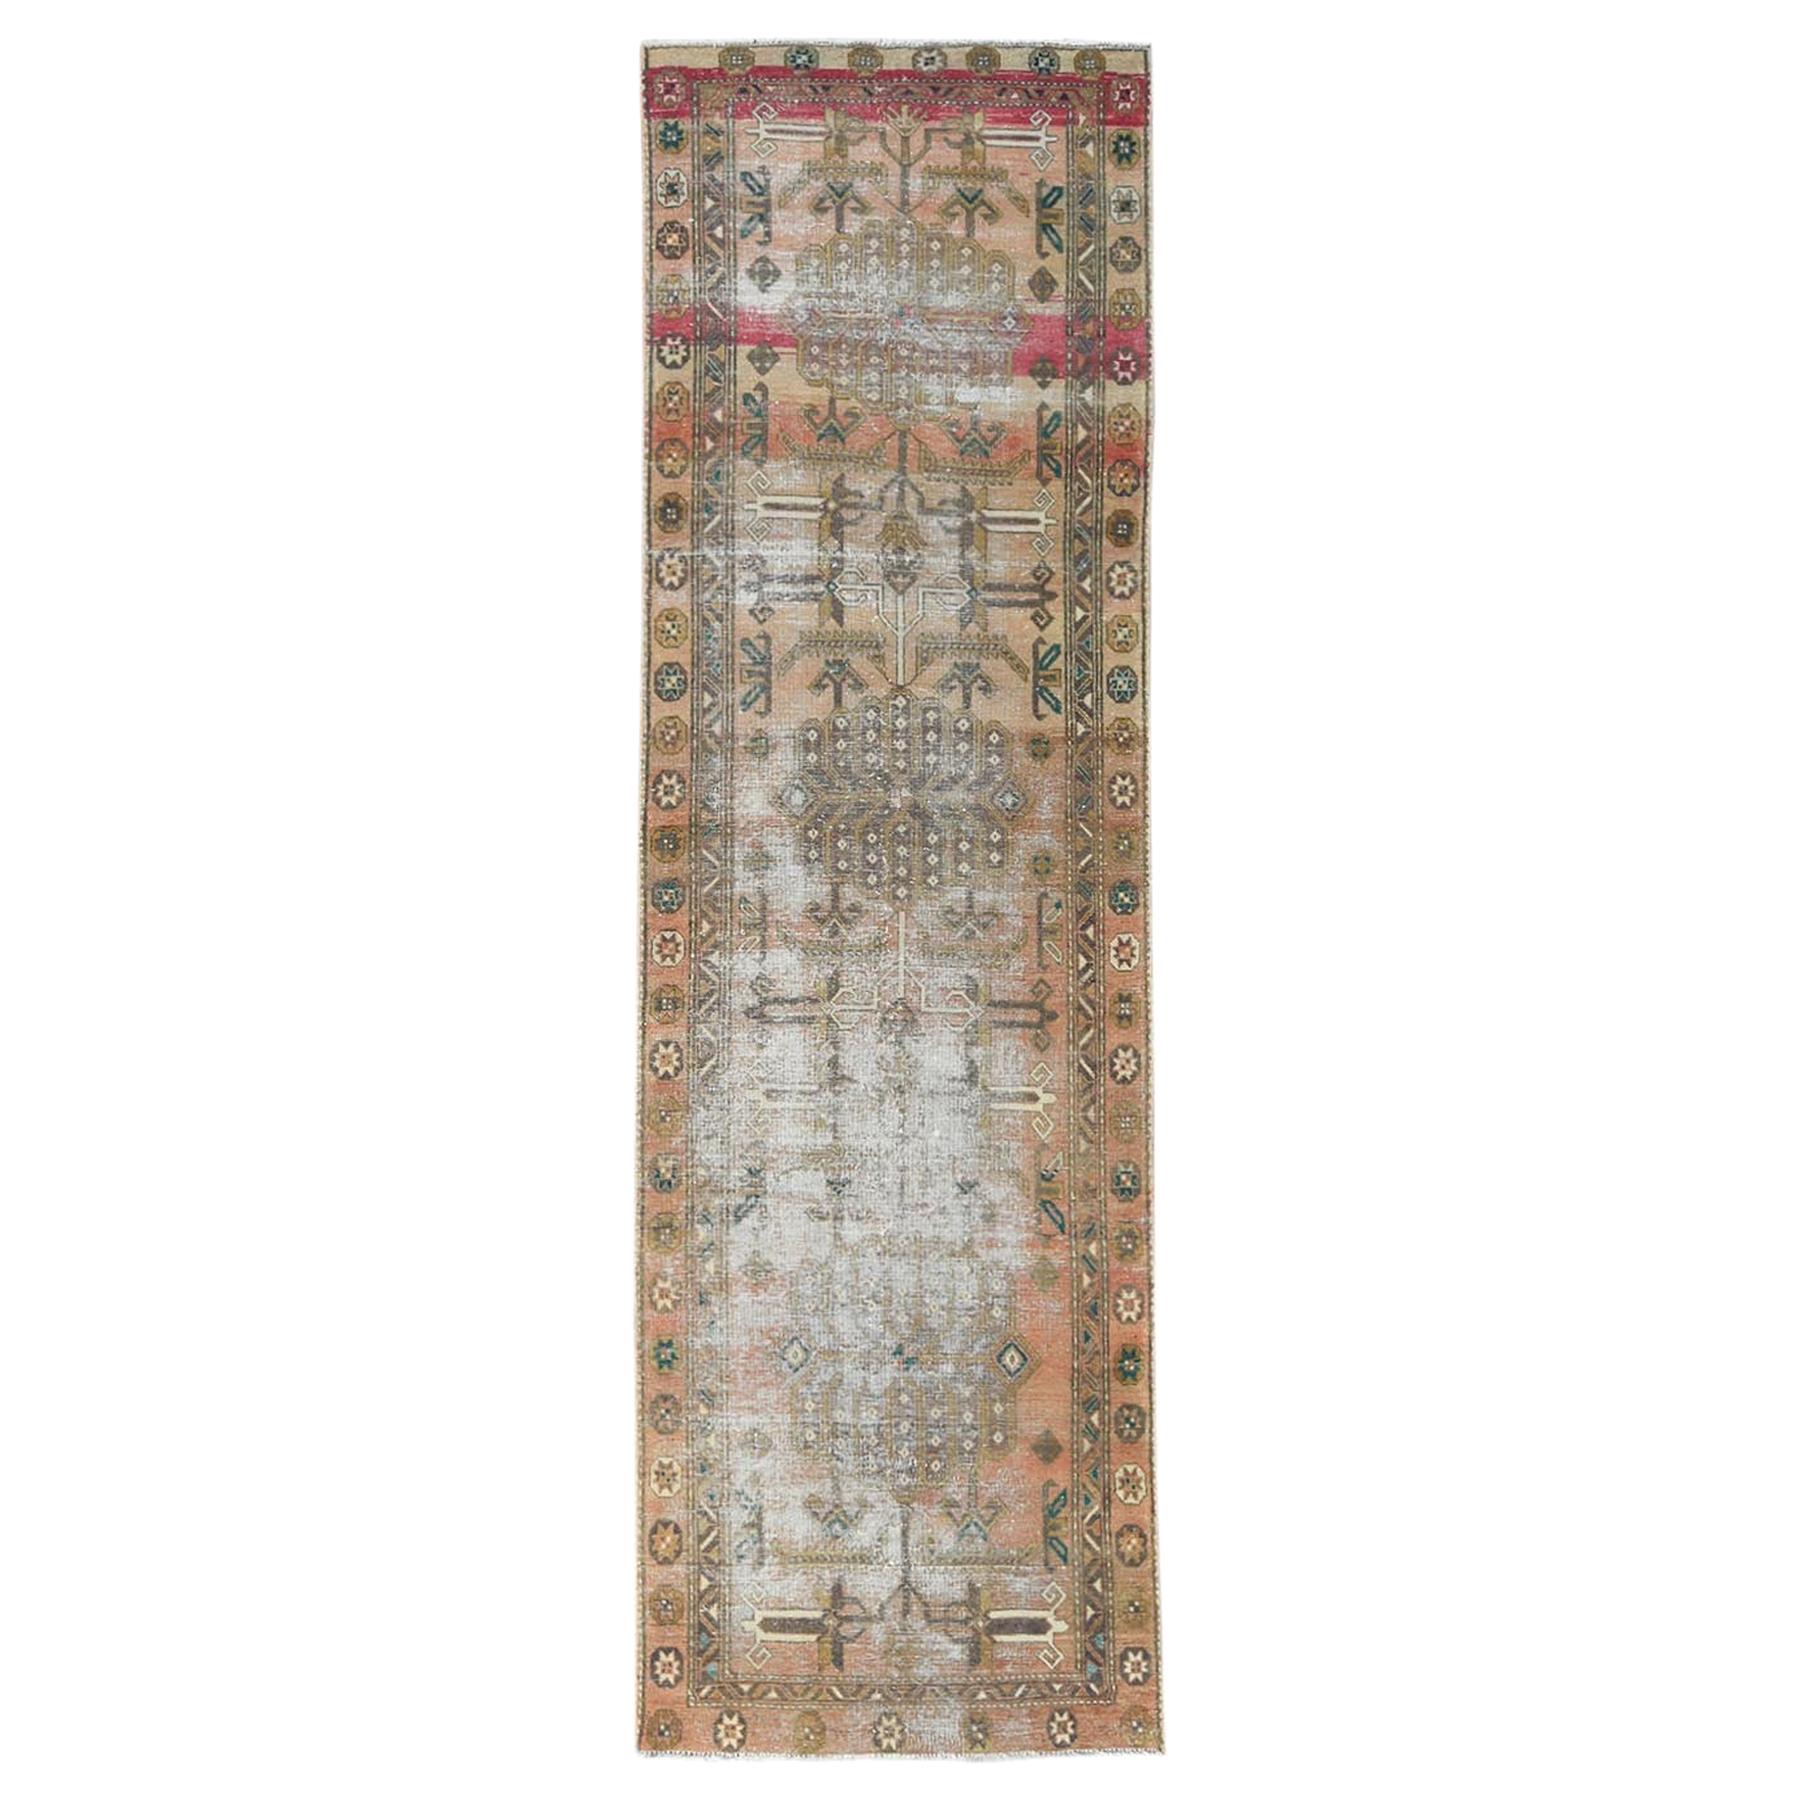 Semi Antique Apricot-Peach Colors Persian Tabriz Worn Down Hand Knotted Wool Rug For Sale